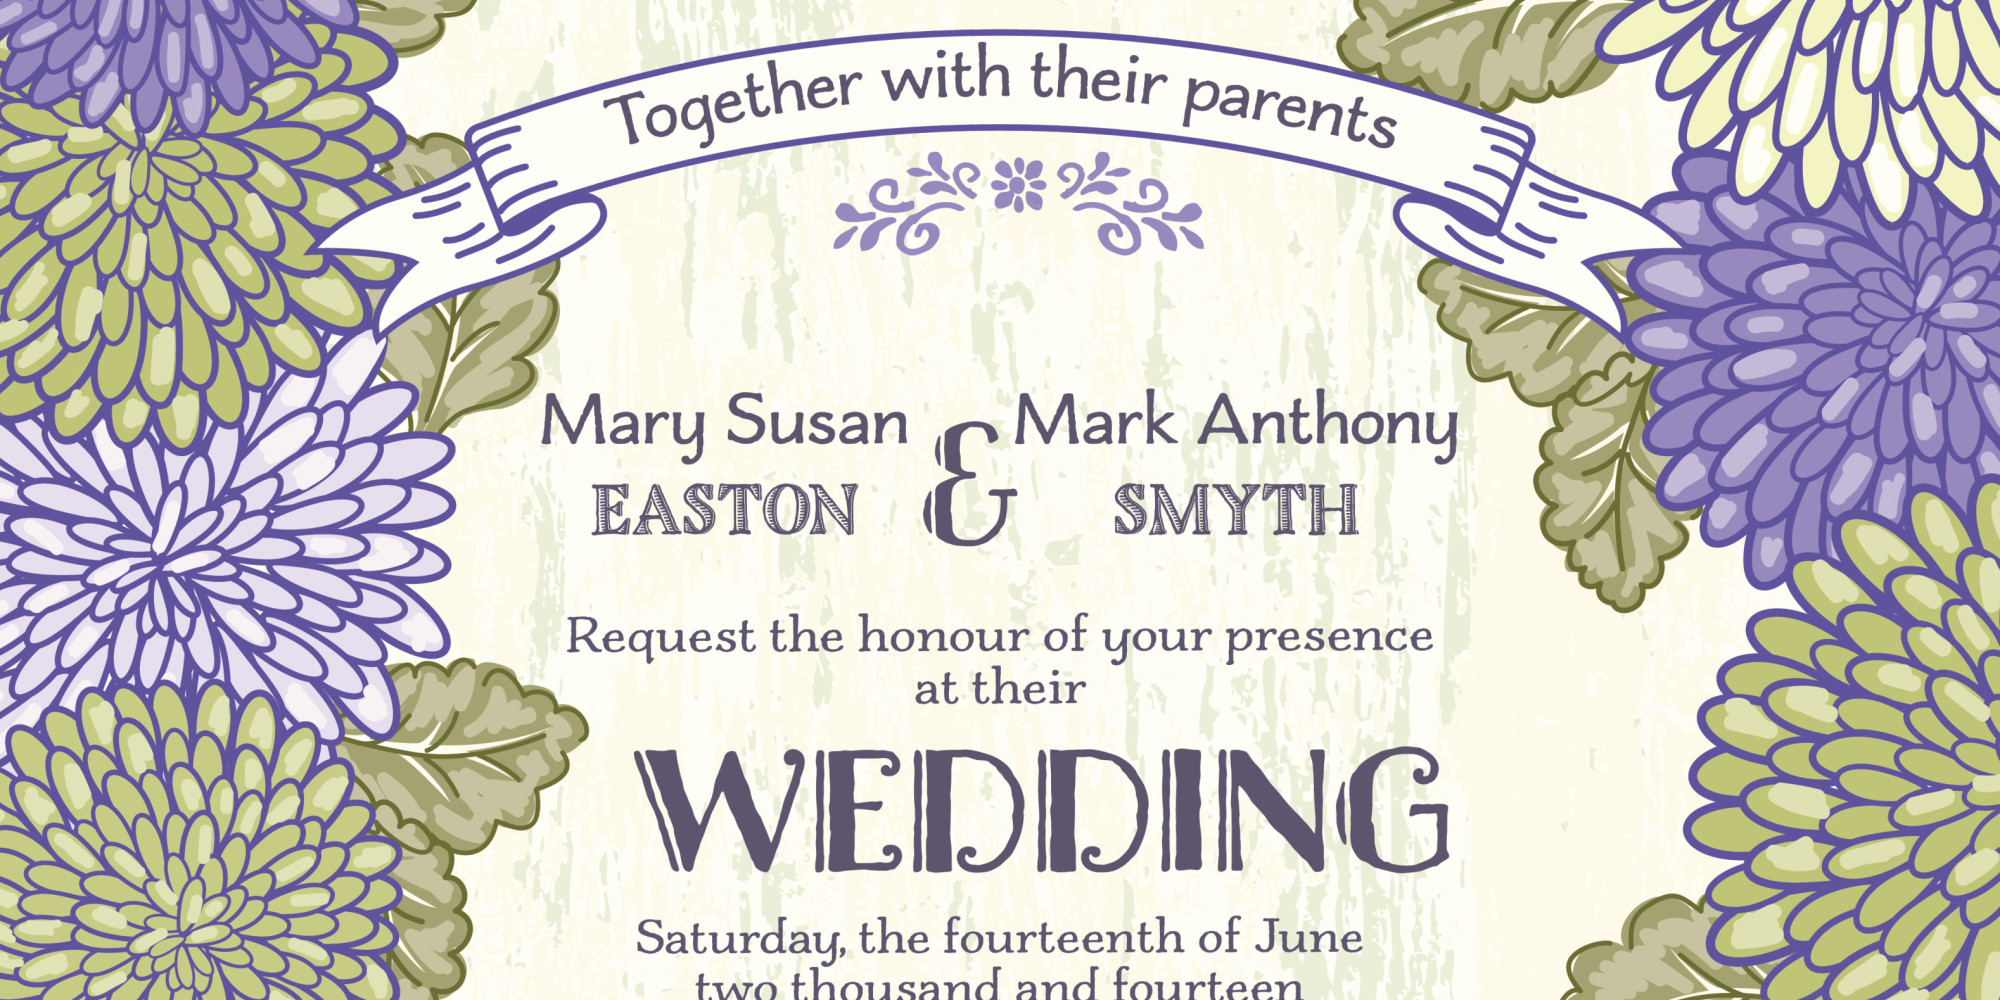 How to write names in wedding invitations